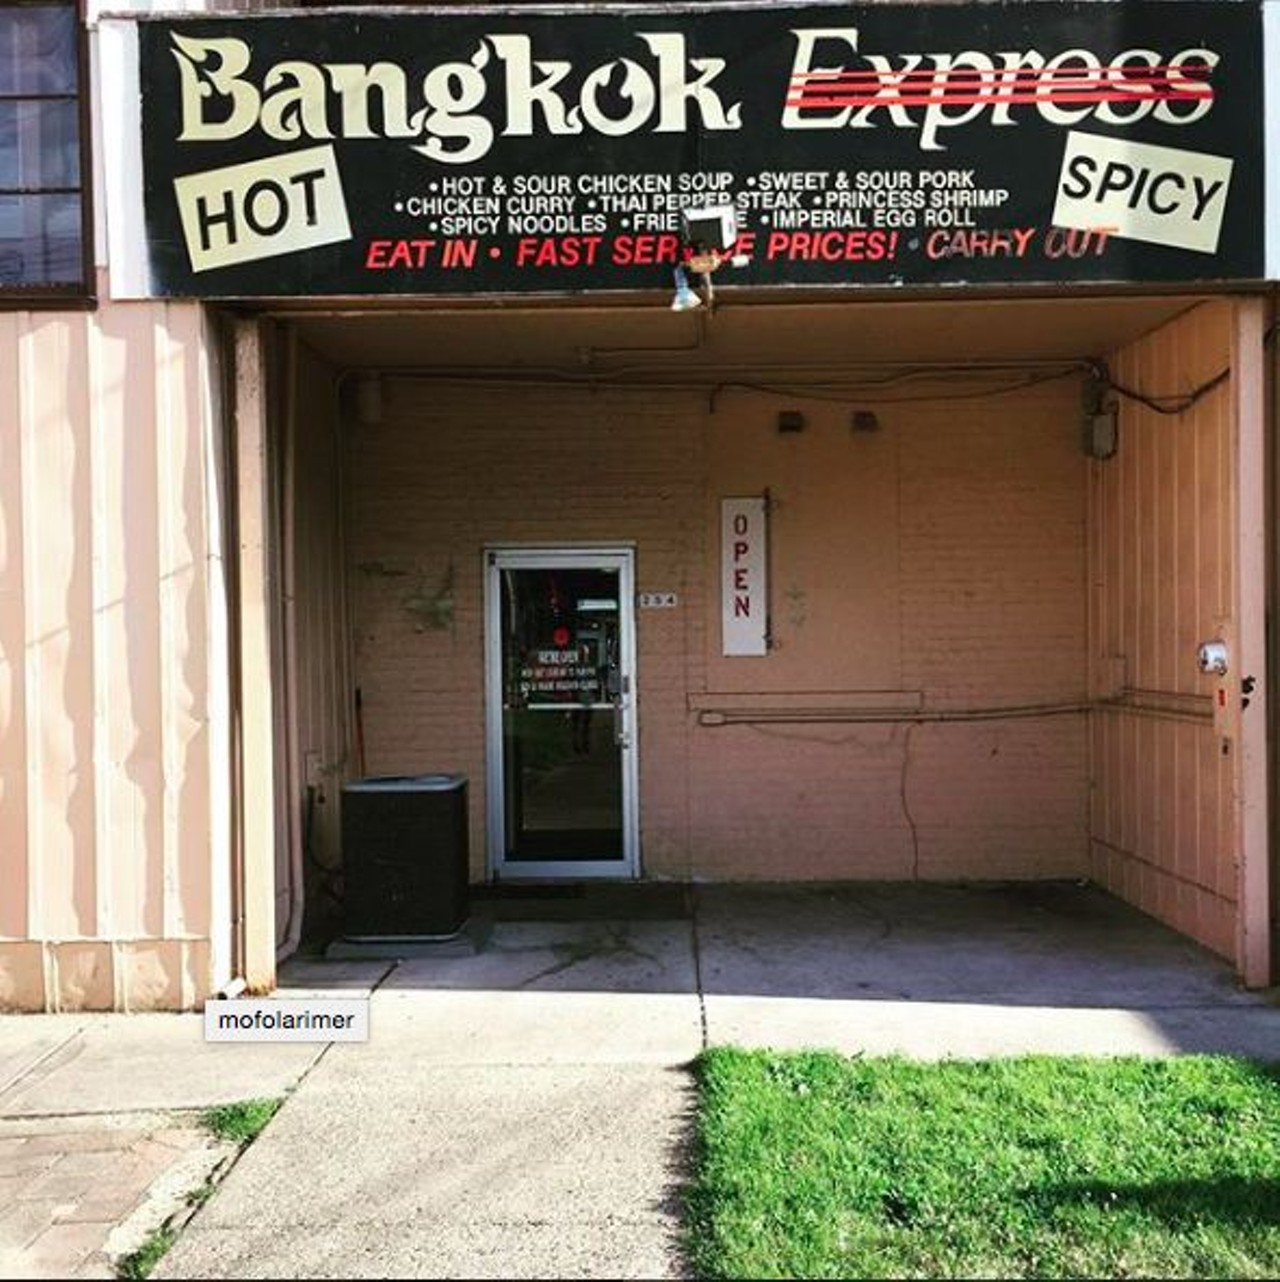 May&#146;s Bangkok Express
254 W. Nine Mile Rd.; 248-545-3929
This smaller restaurant is not to be left out of our list. It&#146;s speedy fast service and delicious food will make you want to come back for more. Whether you like mild, medium, hot or blazing hot, get your meal prepared the way you like it. Some of the favorites include the Pad Thai and curry.
Photo via IG user @cadamilligan